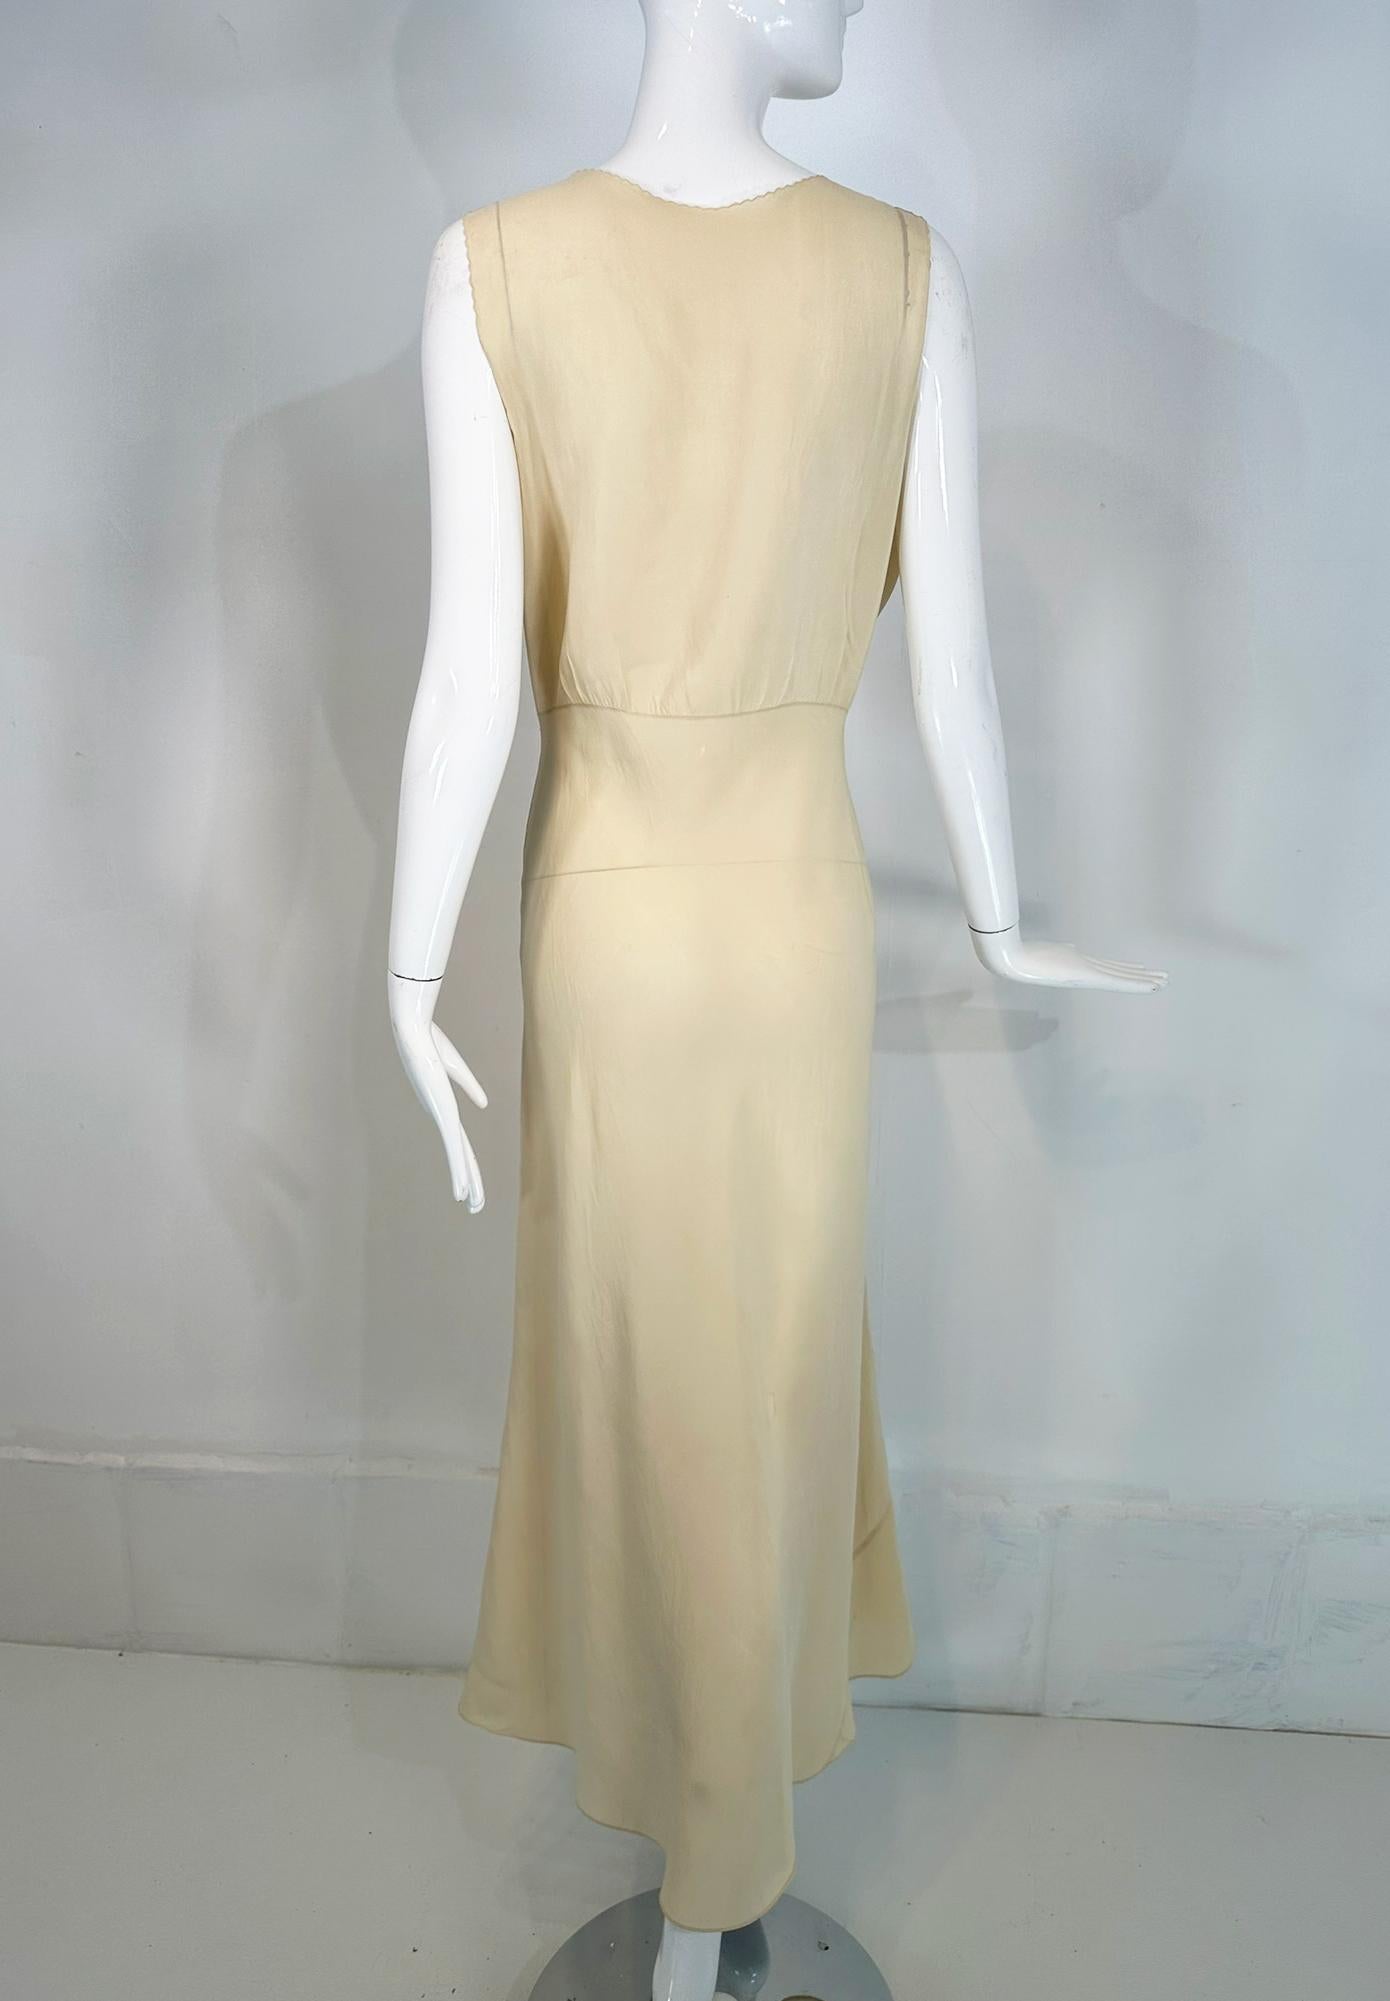 1930s Cream Bias Cut Sheer Silk Hand Embroidered & Appliqued Slip Dress Gown For Sale 5